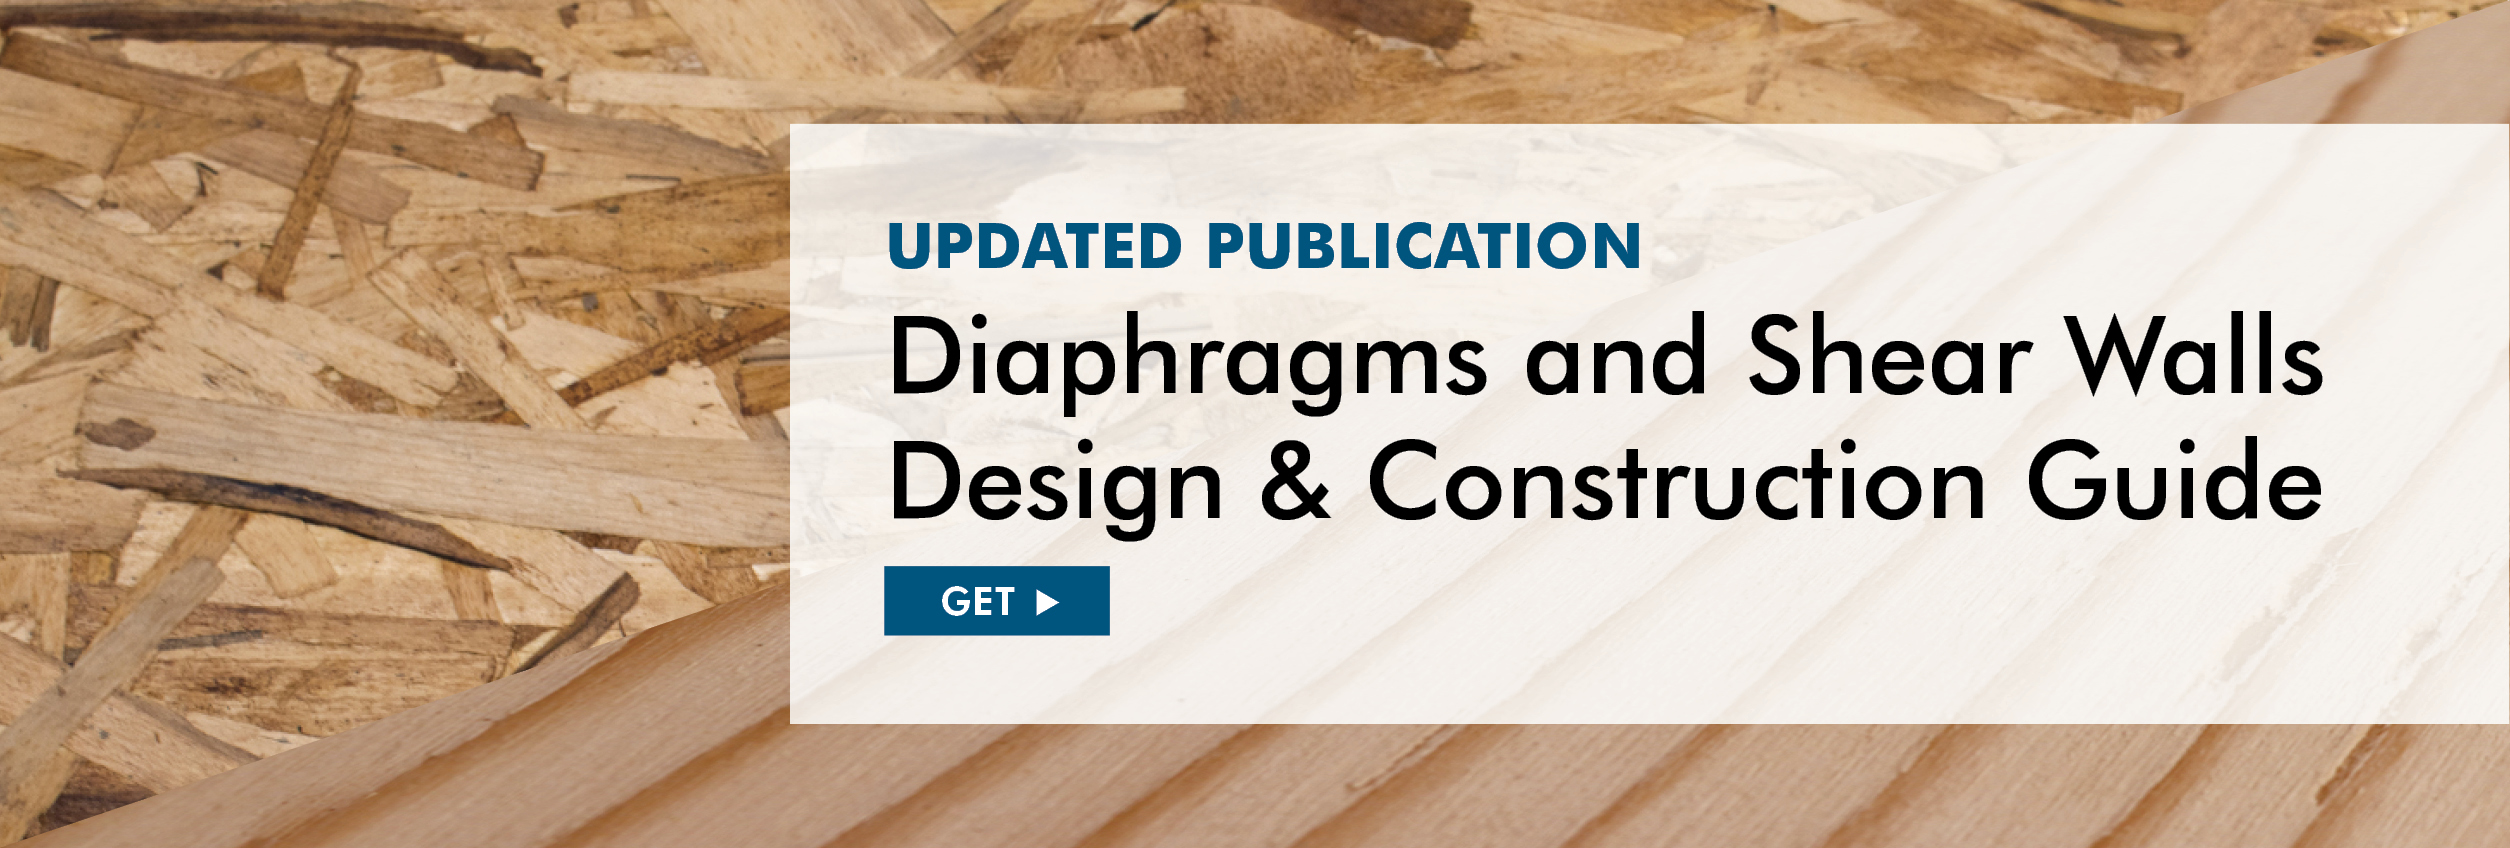 Diaphragms and Shear Wall Design & Construction Guide